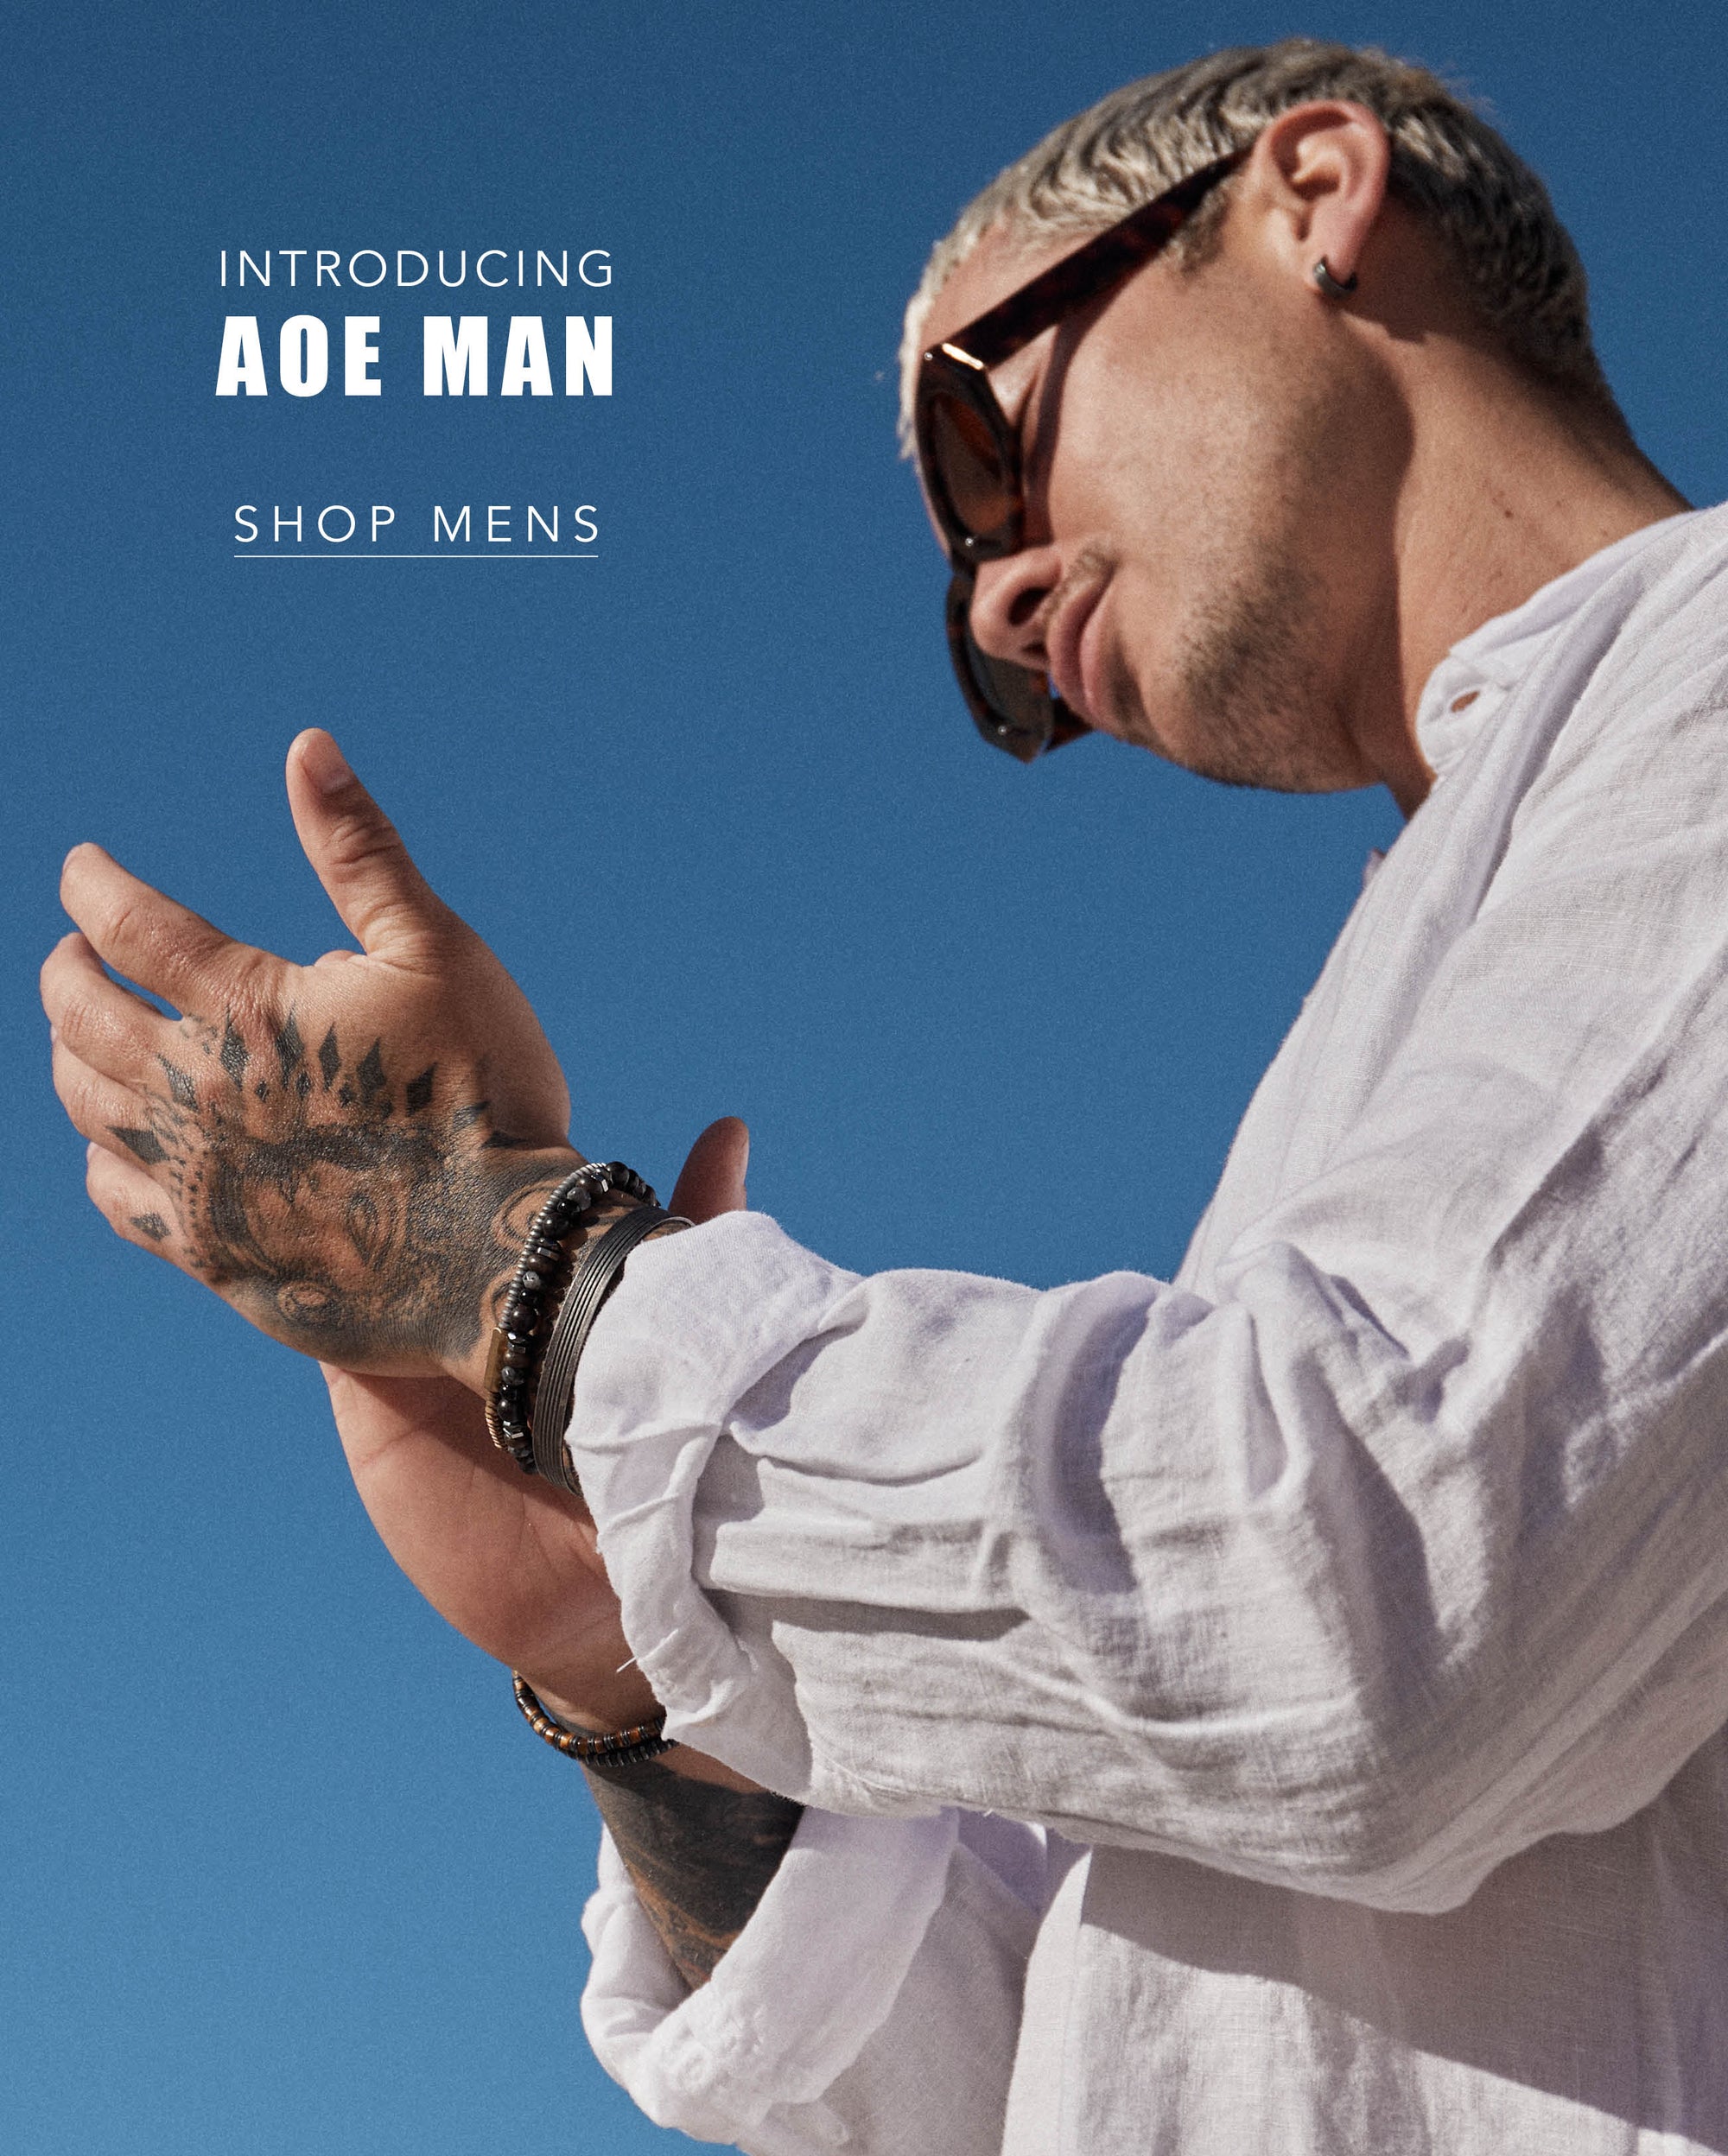 Stylish man wearing sunglasses and a white shirt, introducing the AOE Man Shop for men's jewelry and sunglasses